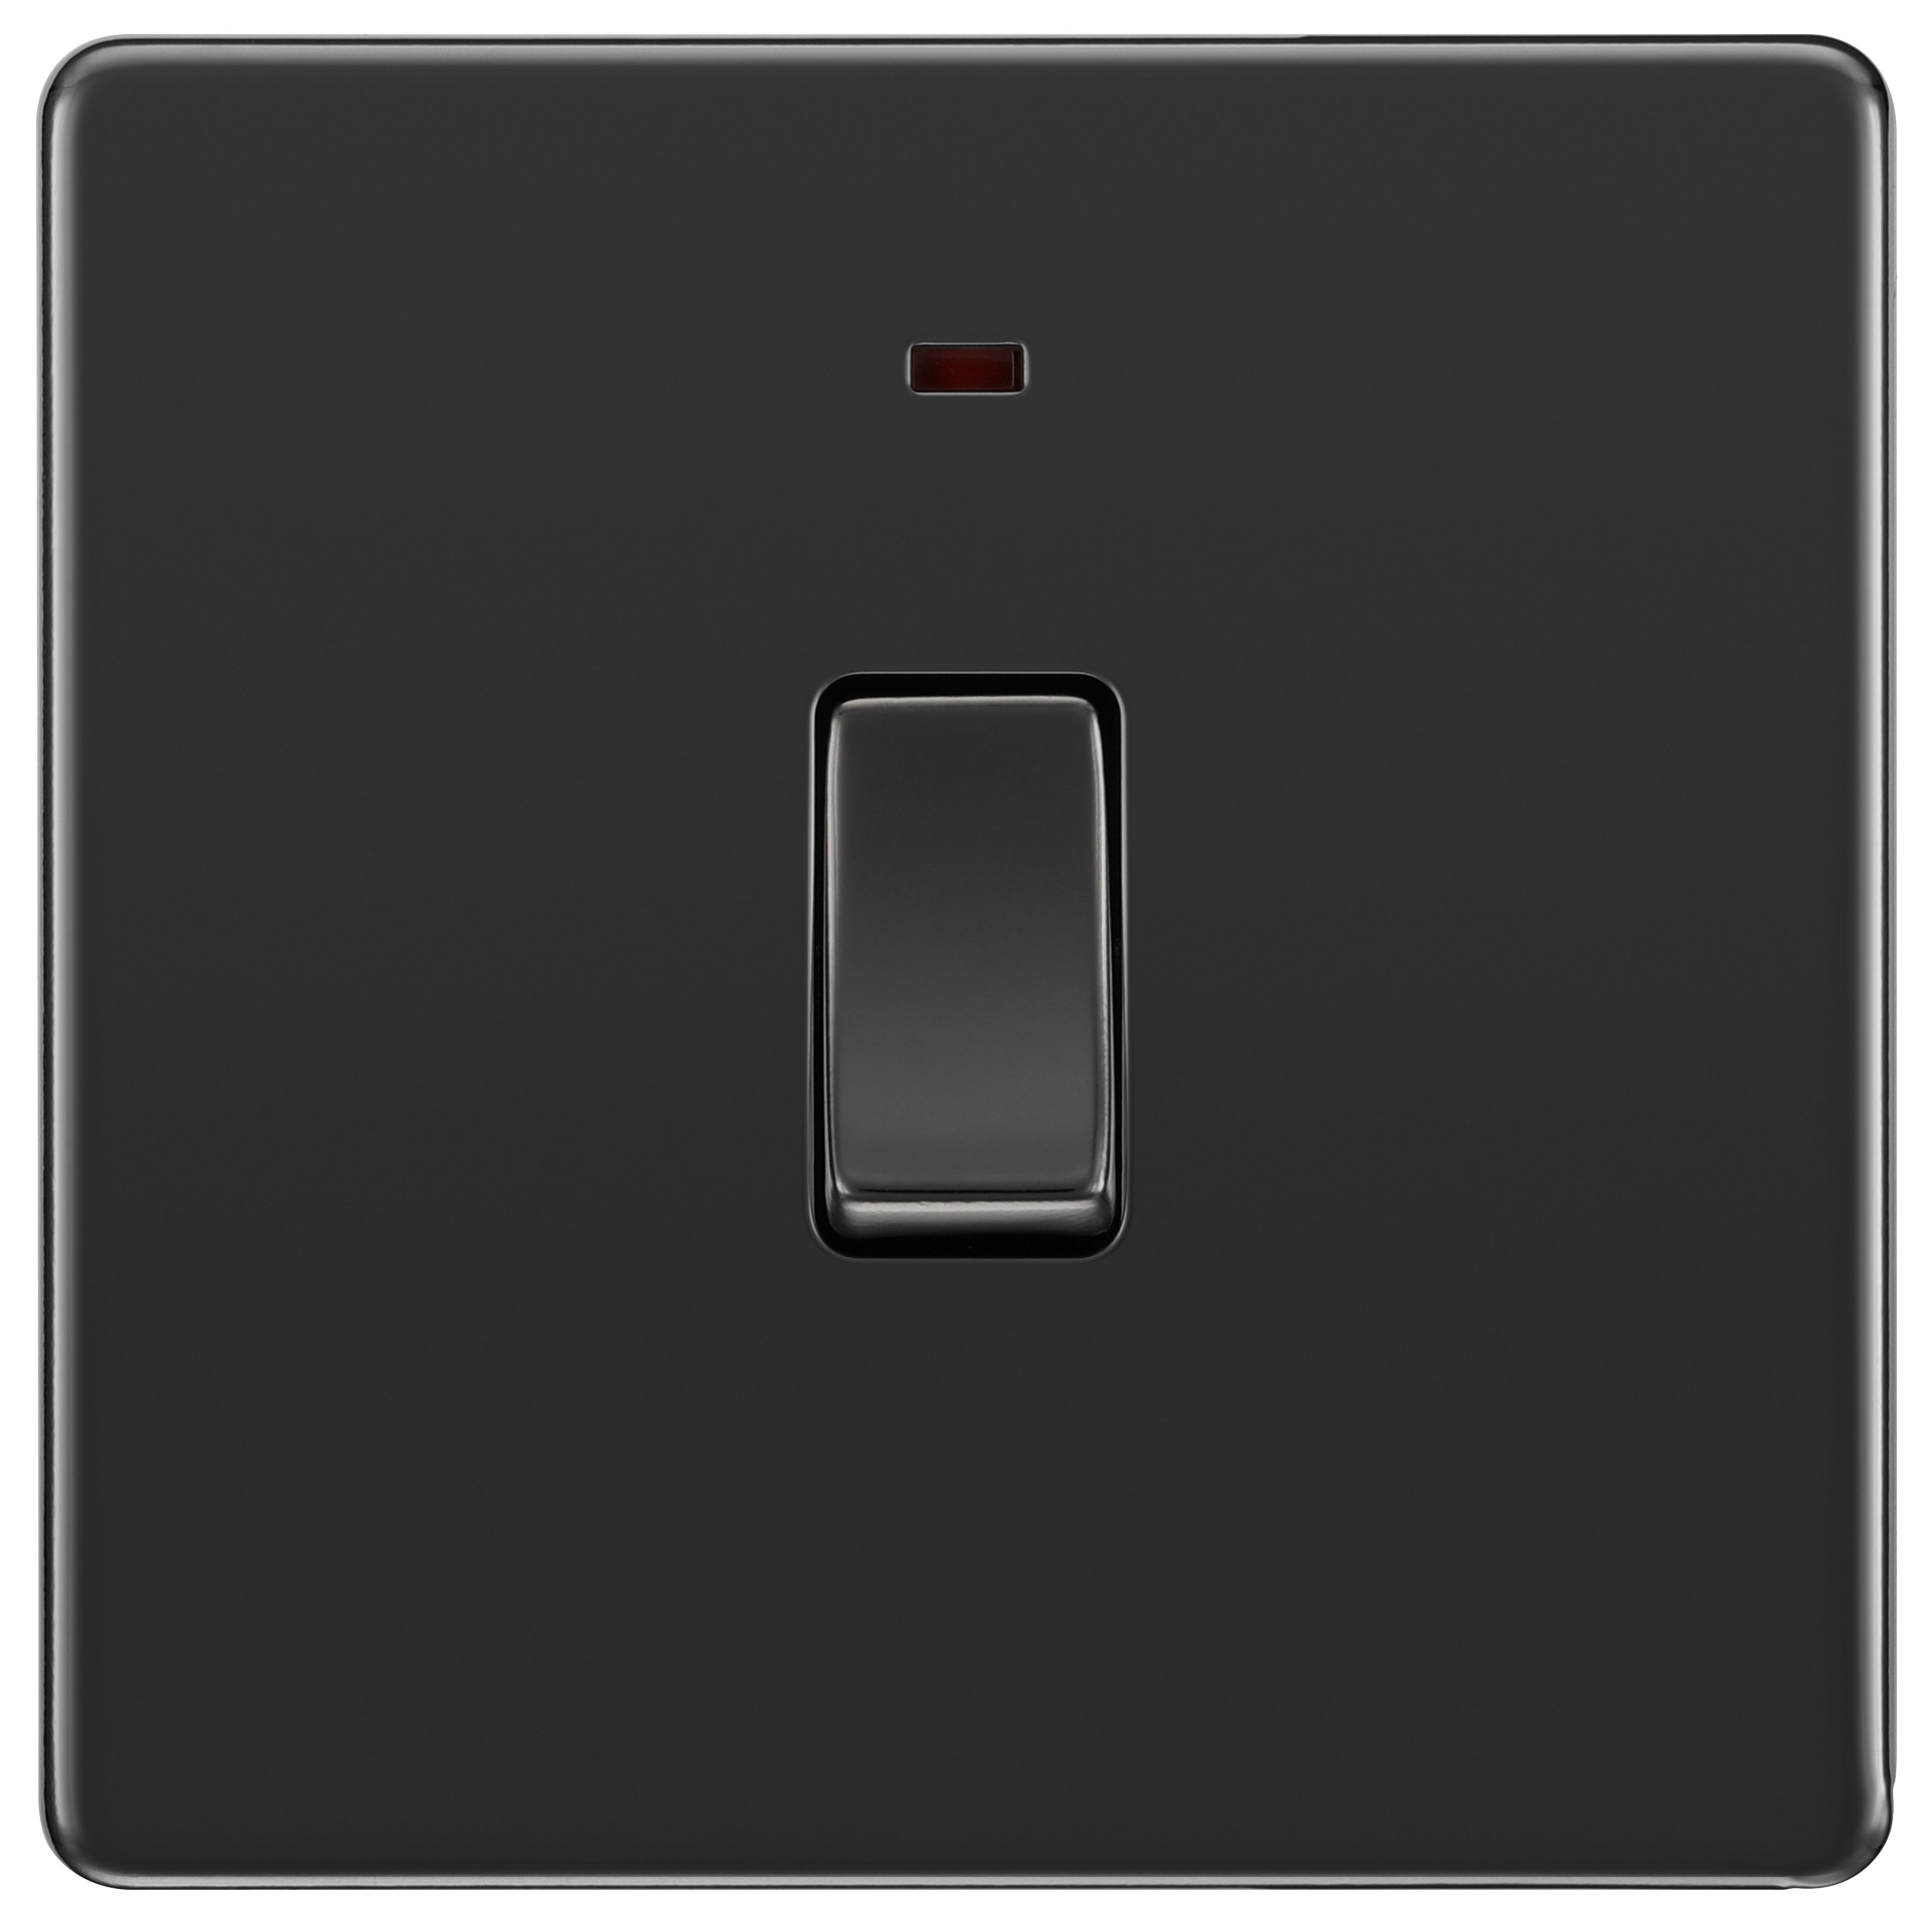 GoodHome 20A Rocker Flat Control switch with LED indicator Black